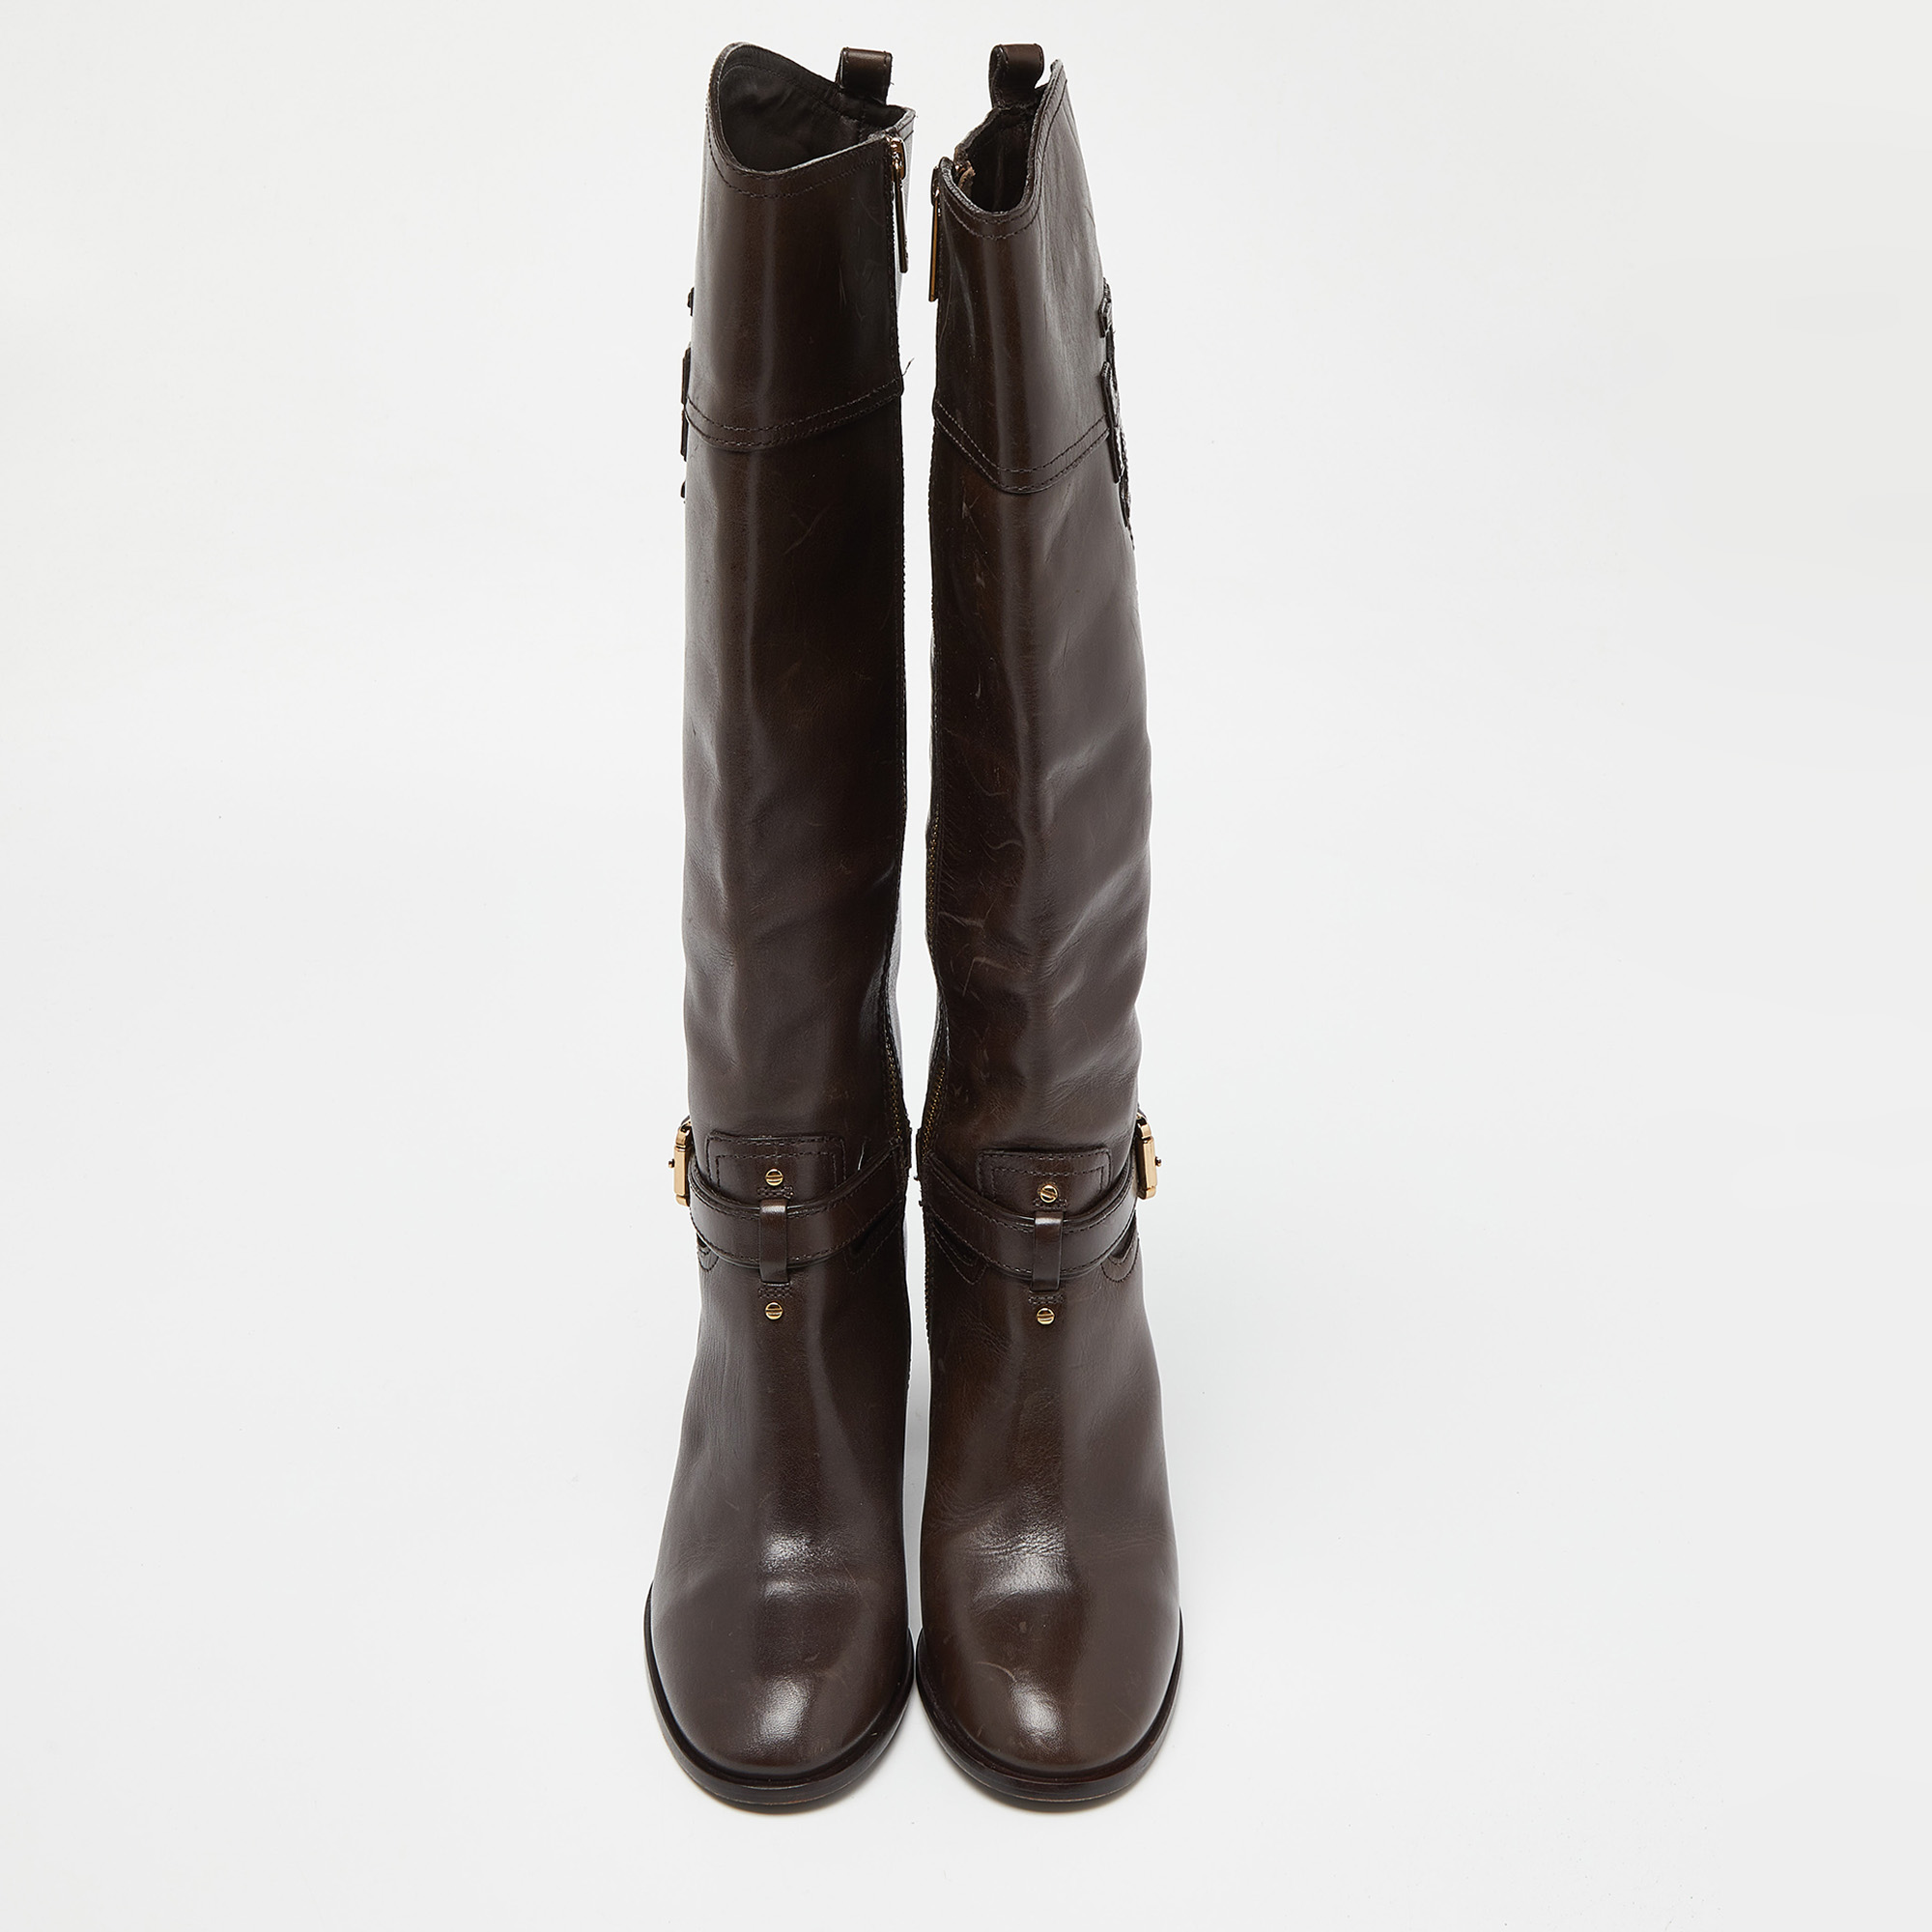 Tory Burch Brown Leather Knee Length Boots Size 38.5